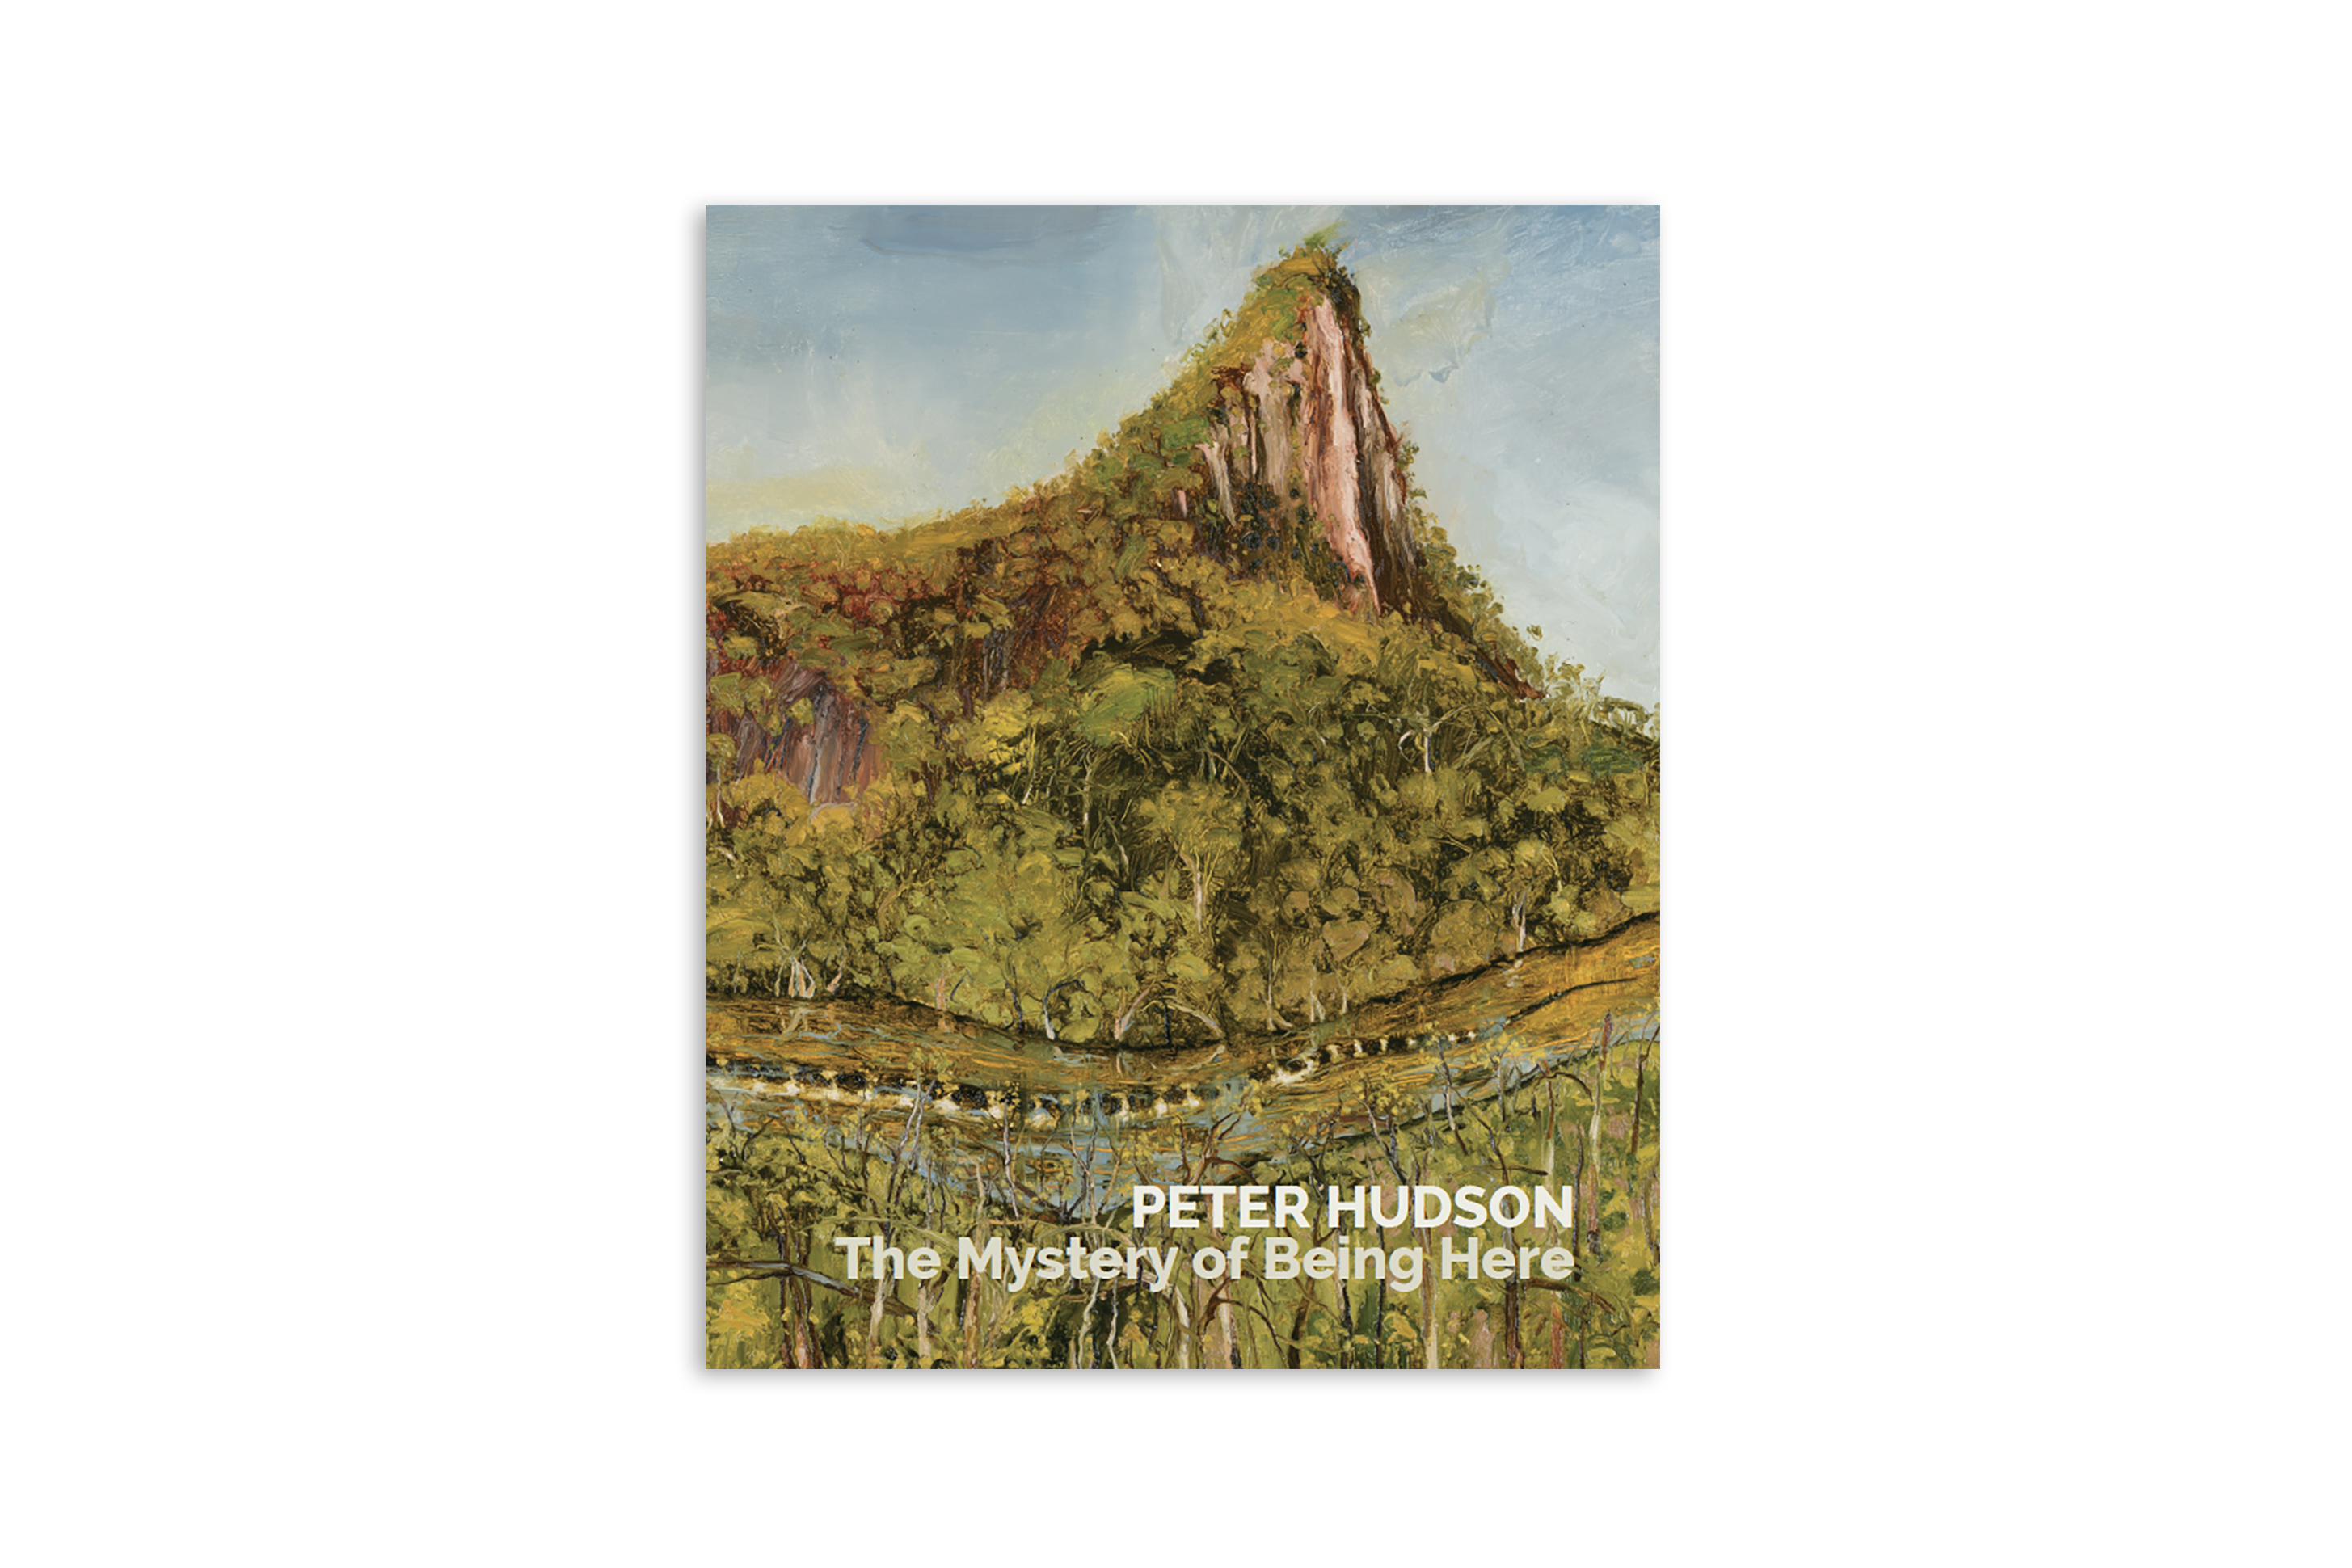 Peter Hudson: The Mystery of Being Here